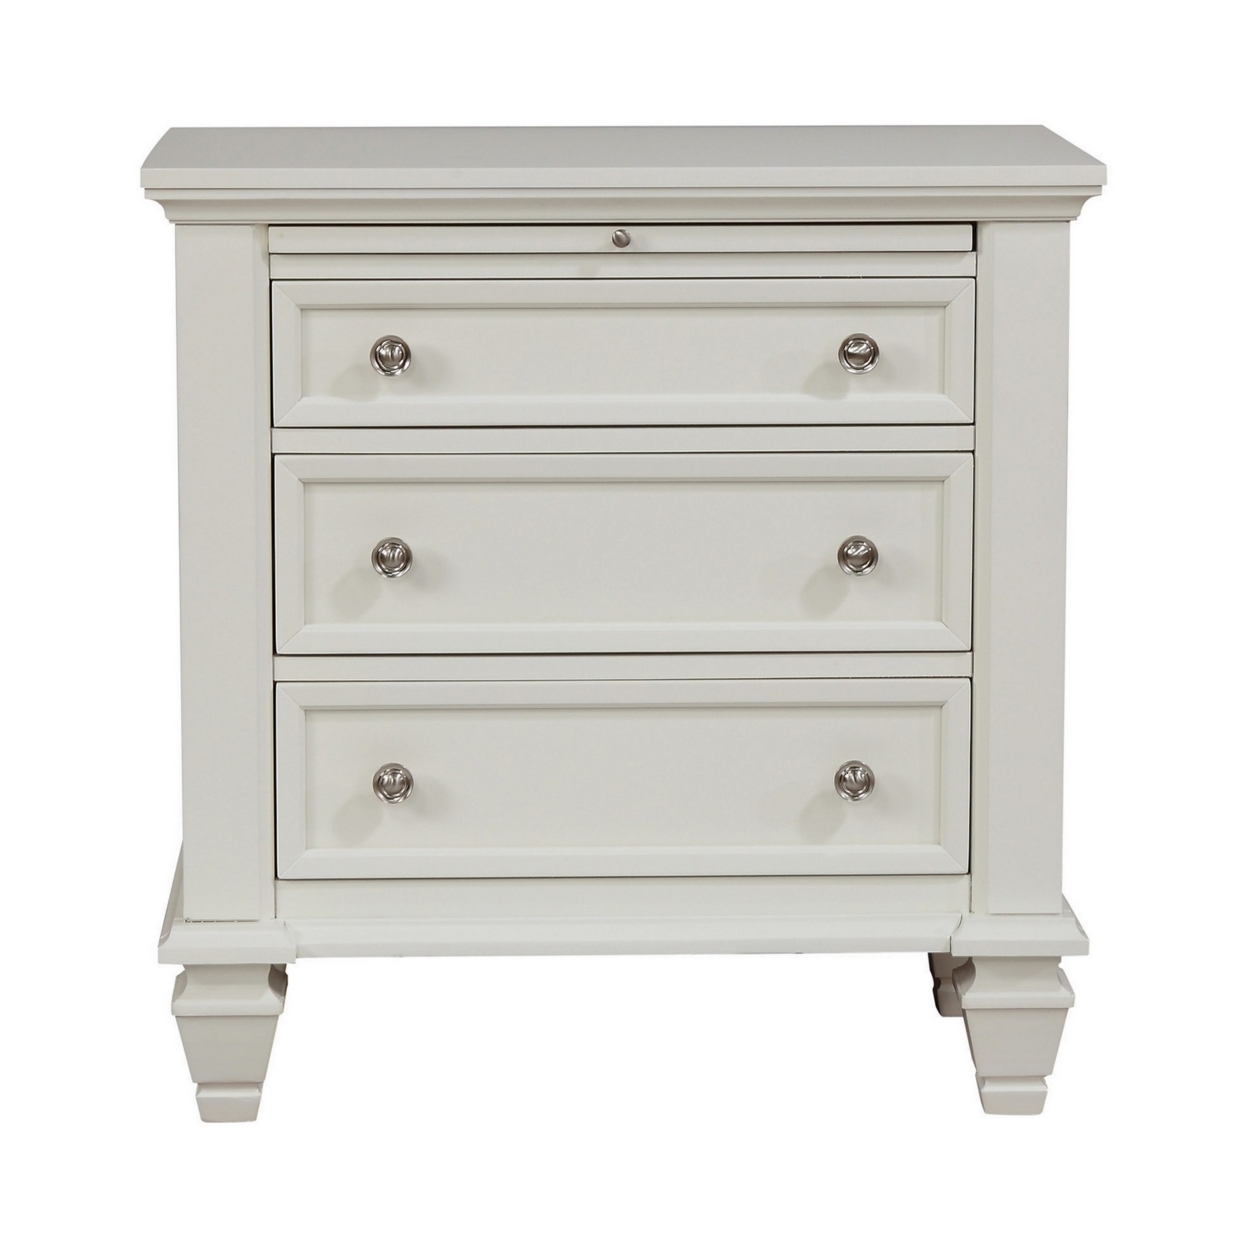 Lila 30 Inch Nightstand With Slide Out Tray, Felt Lined Top Drawer, White- Saltoro Sherpi